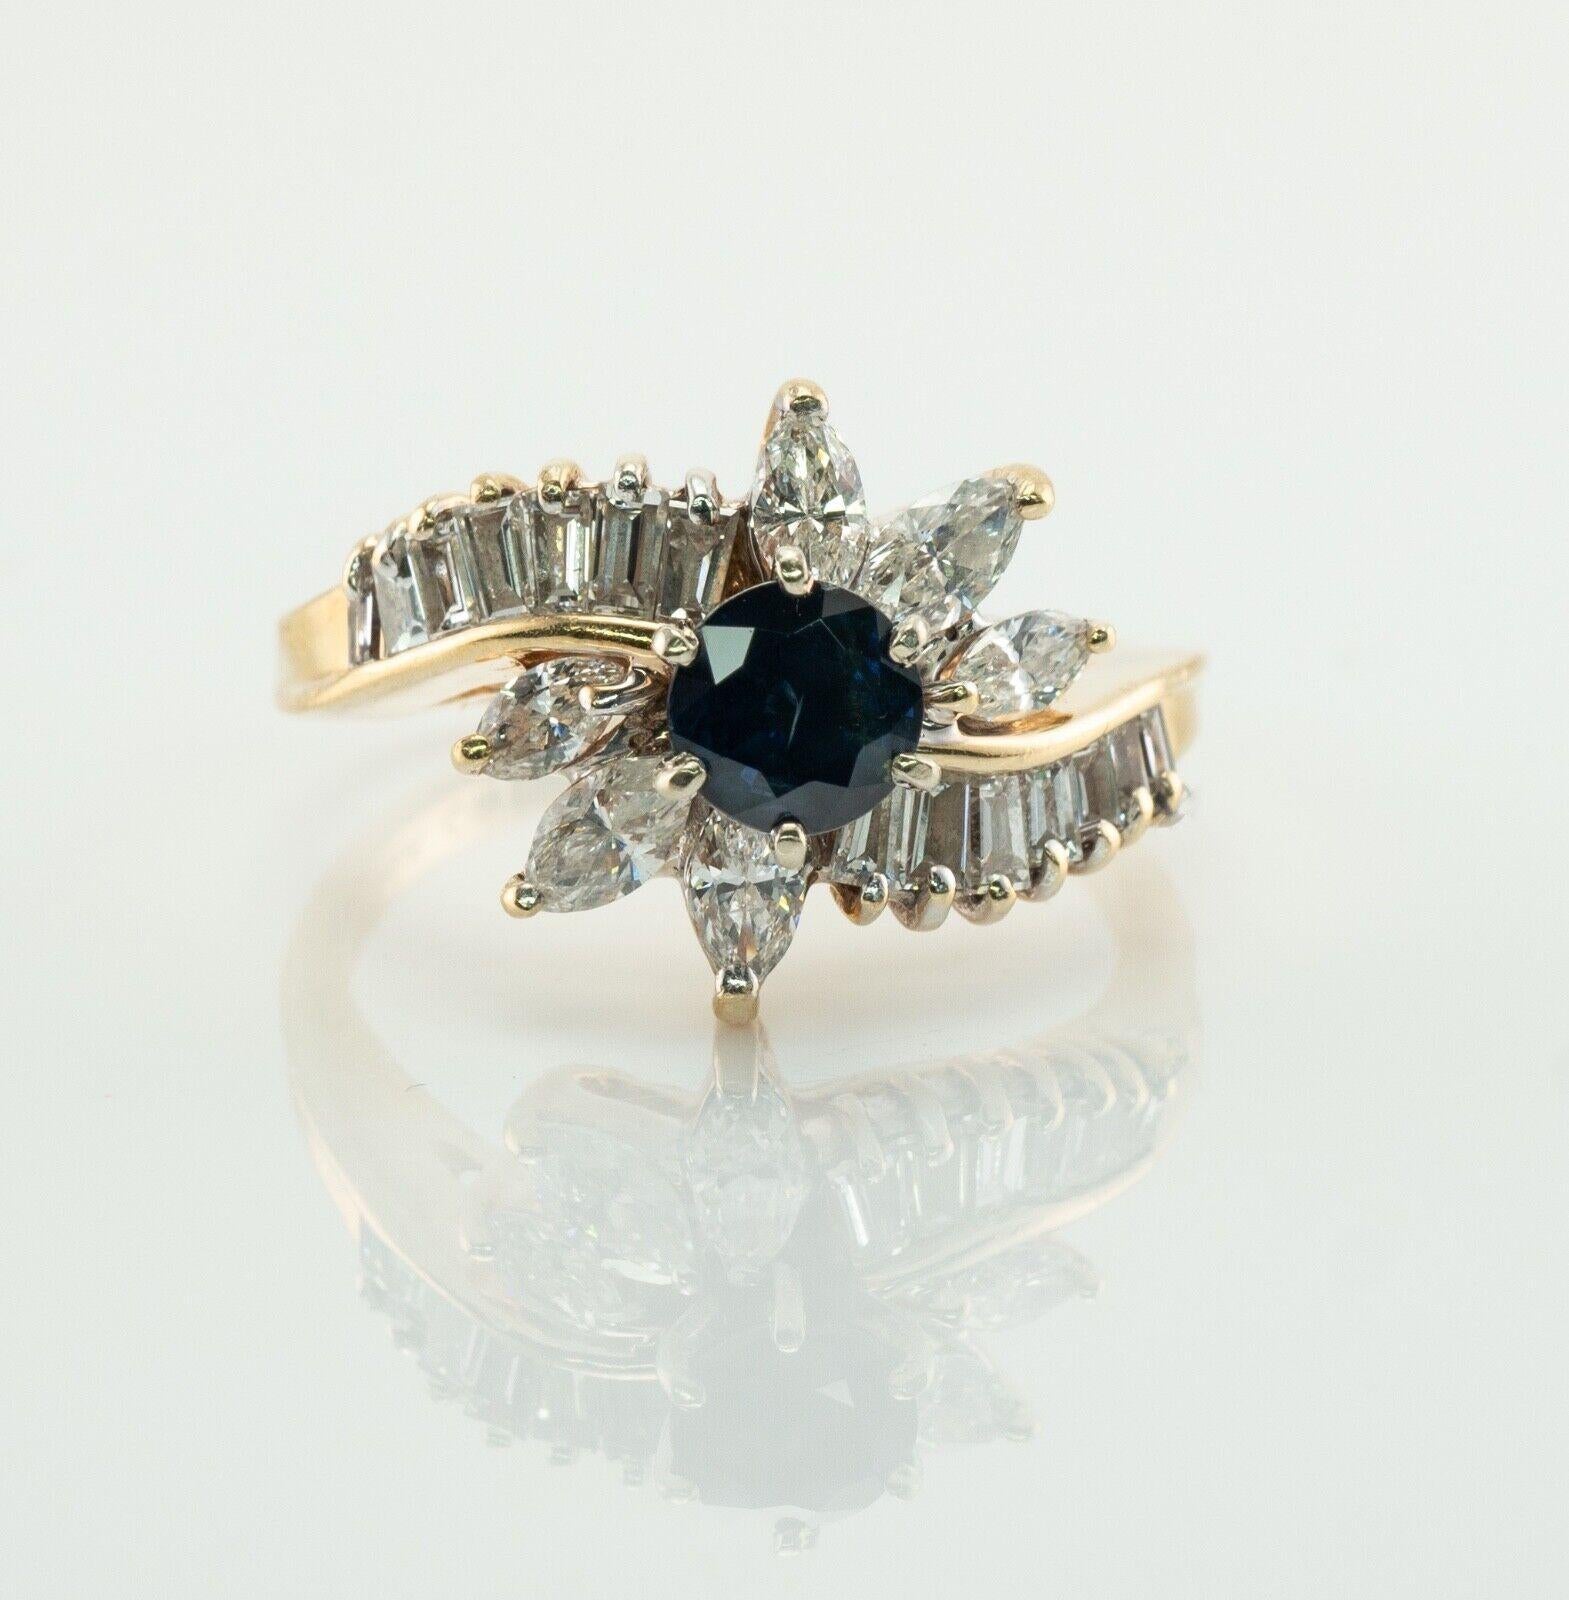 This estate ring is finely crafted in solid 14K Yellow gold and set with natural Earth mined Sapphires and Diamonds. The center round cut blue Sapphire measures 5mm (.65 carat). The center stone is surrounded with 6 marquise and 14 channel set white